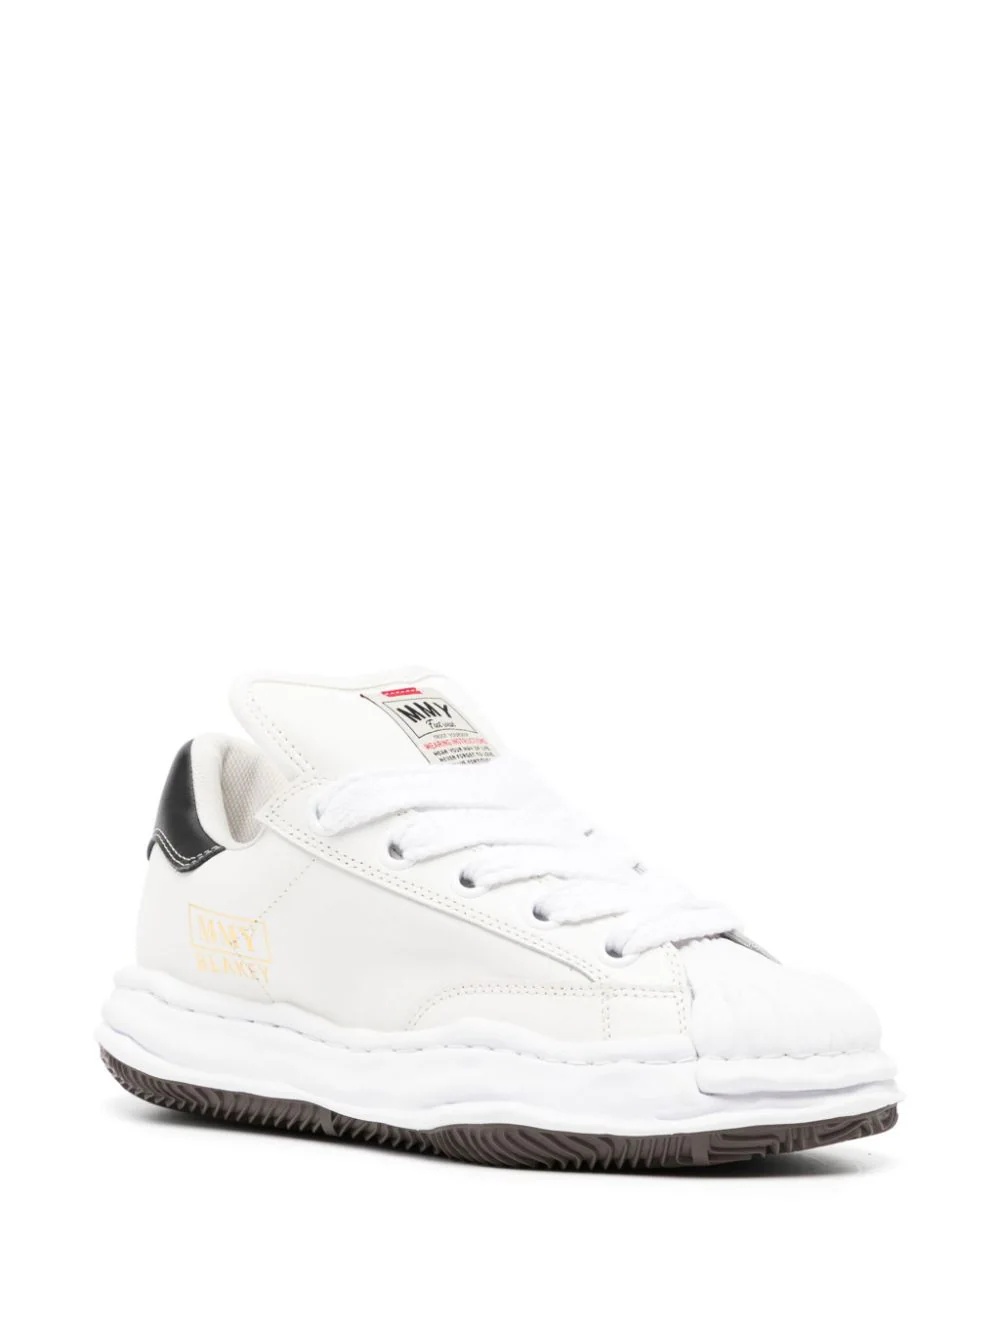 Blakey Original Sole Leather Sneakers - 2